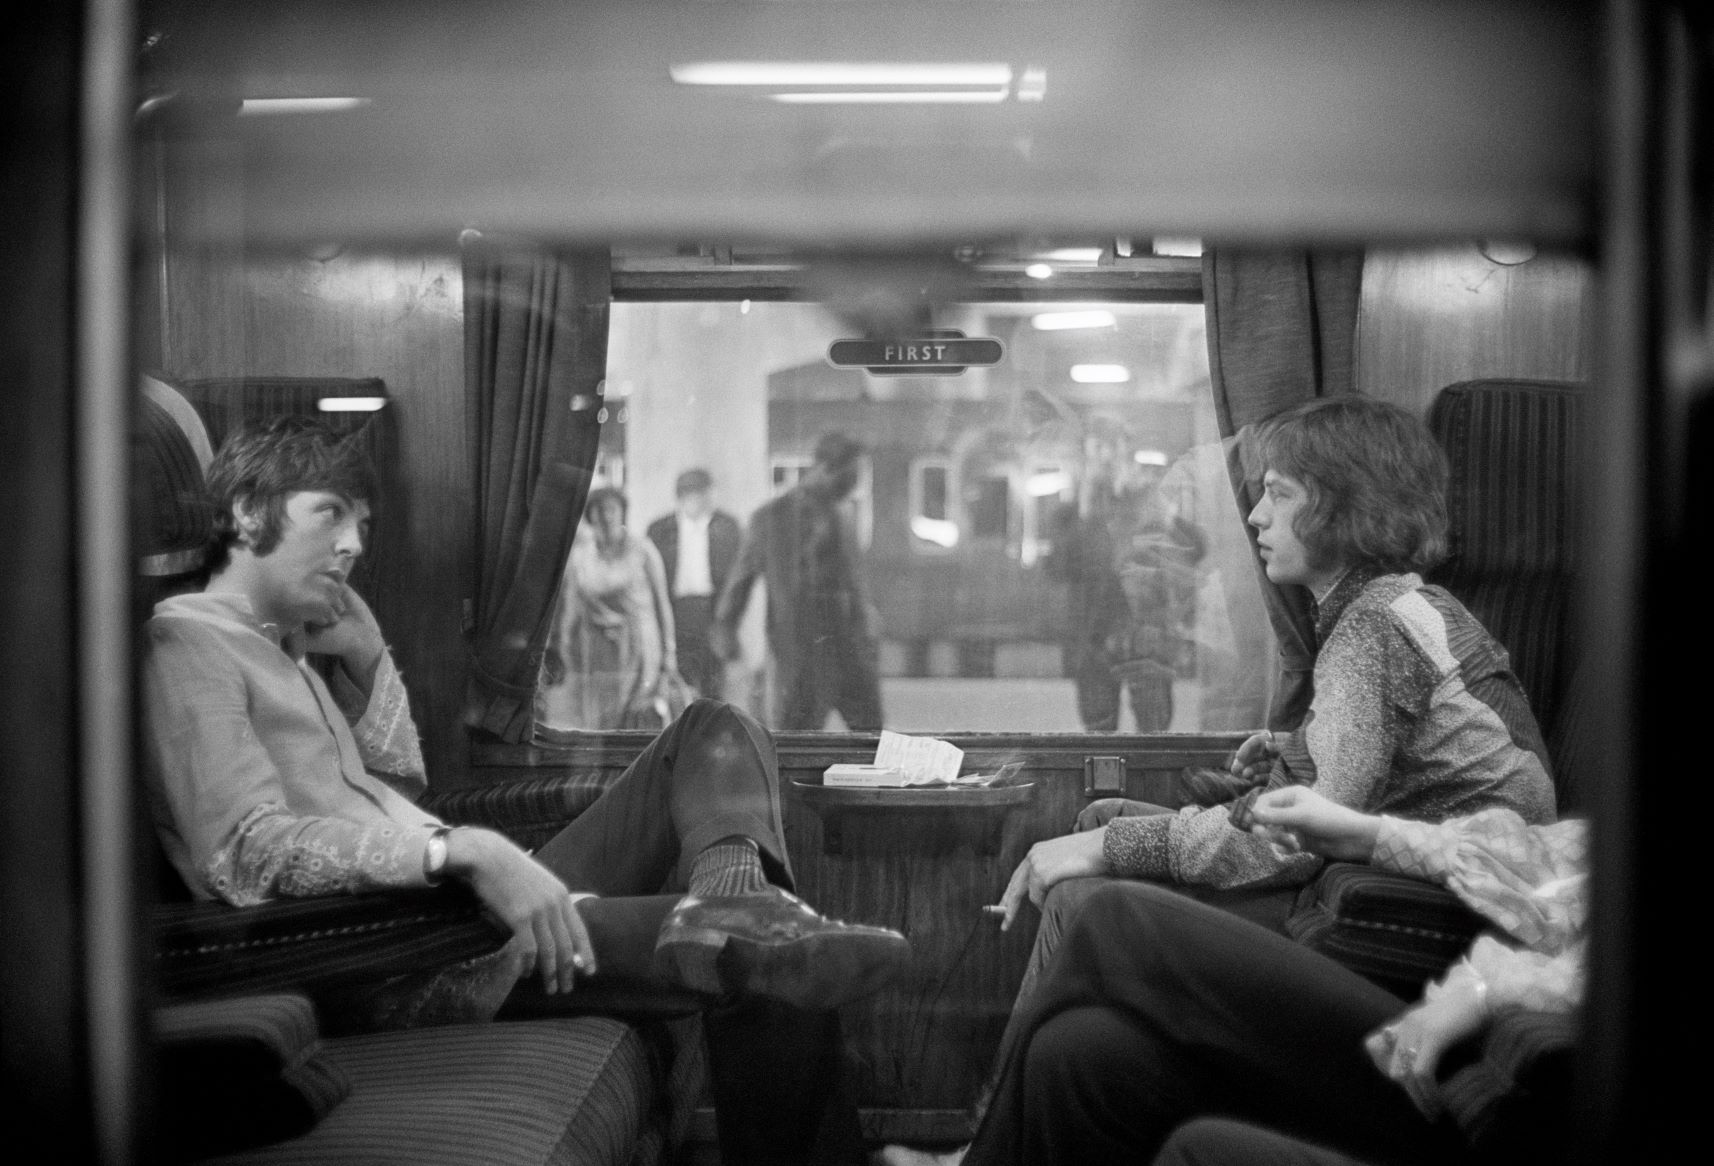 Paul McCartney and Mick Jagger on a train